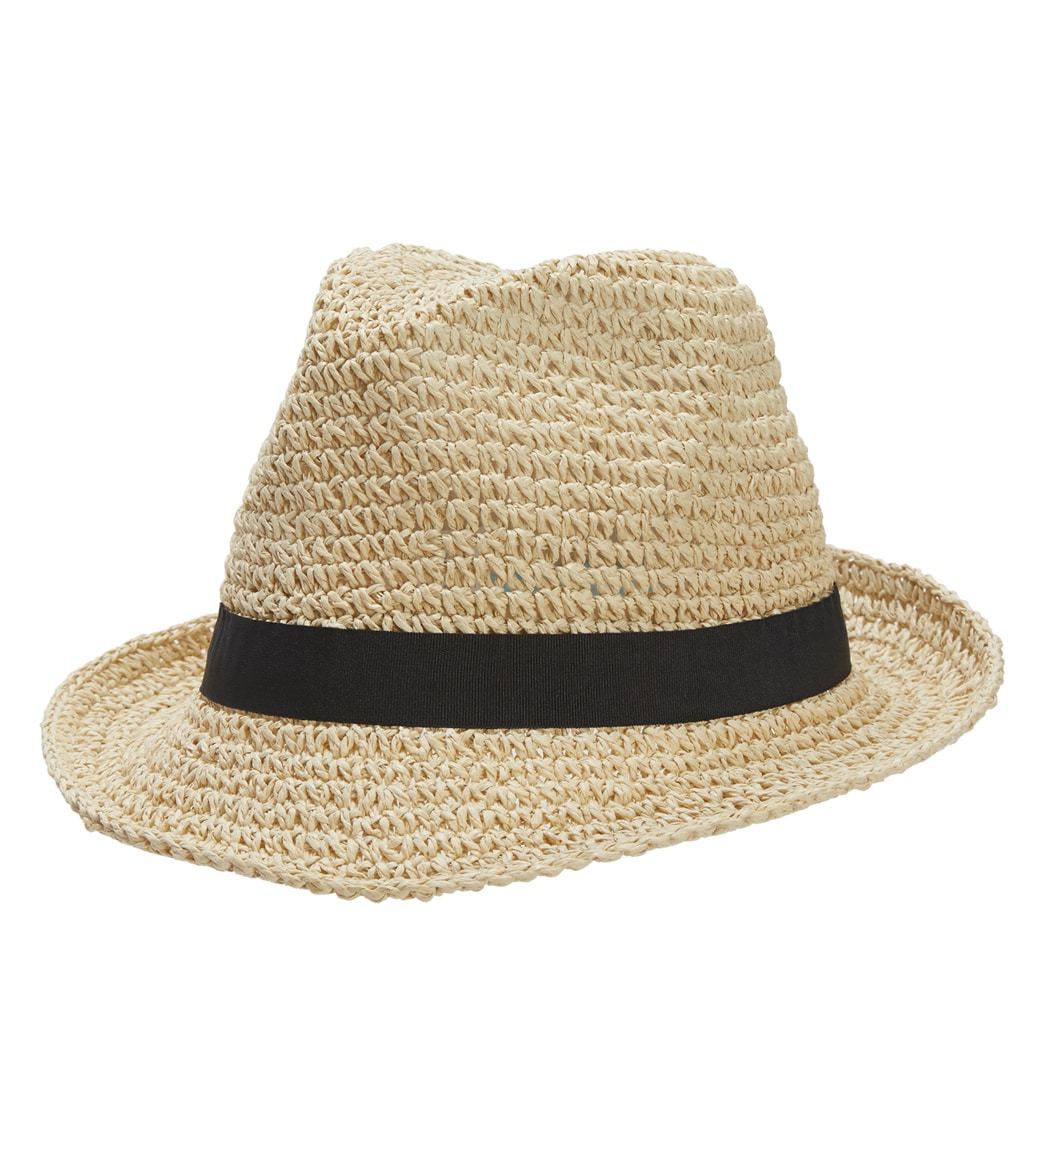 Physician Endorsed Women's Nantucket Straw Hat - Natural/Black One Size - Swimoutlet.com